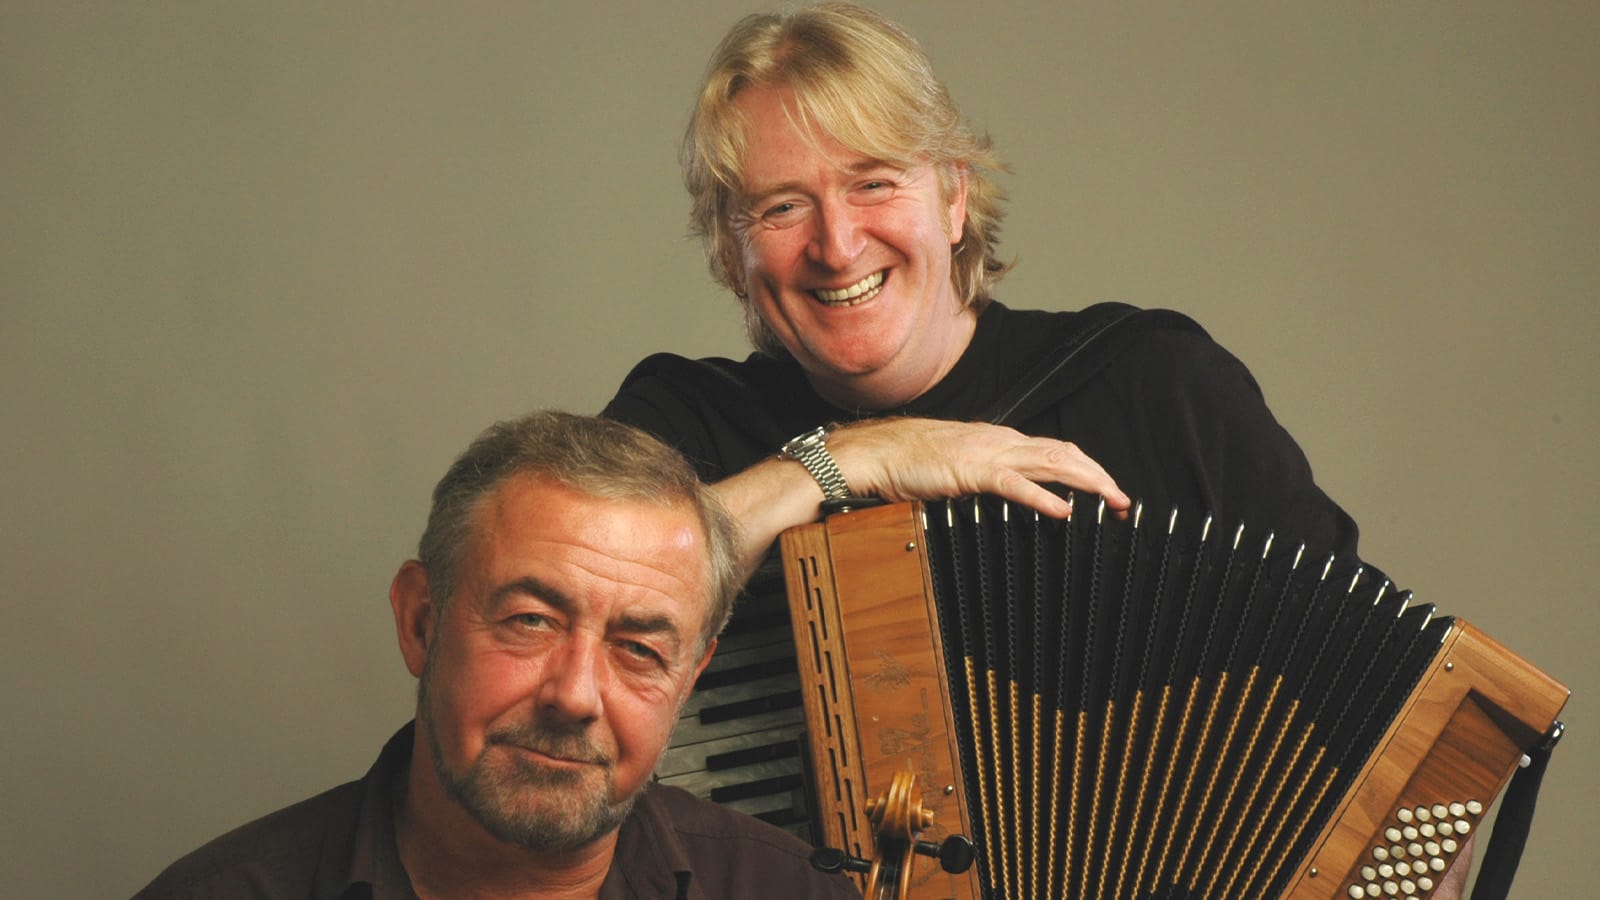 A man holding an accordion and a man holding a fiddle